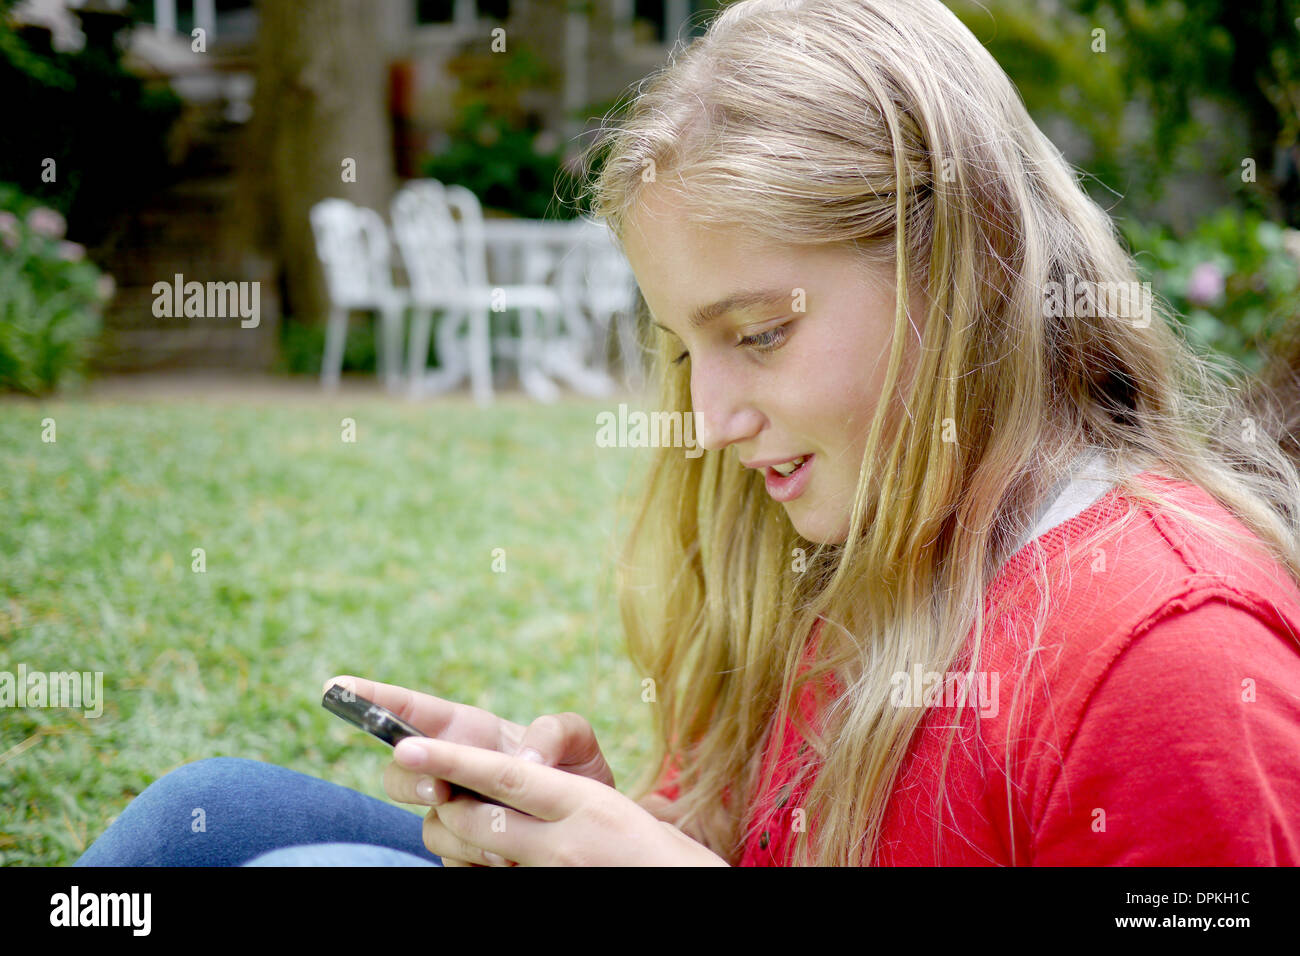 young girl types a text message Stock Photo